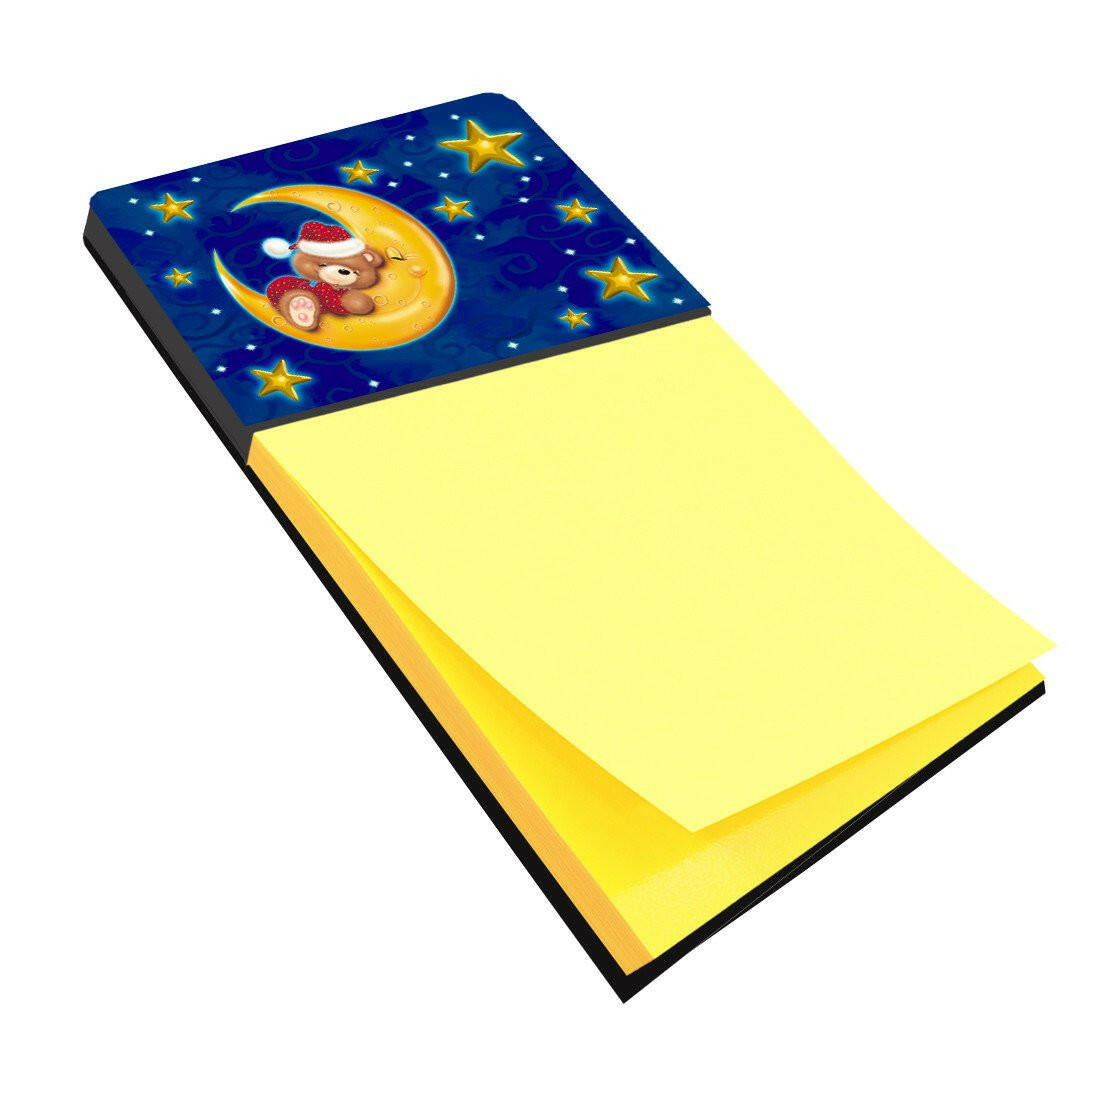 Bear Sleeping in the Moon and Stars Sticky Note Holder APH514BSN by Caroline's Treasures